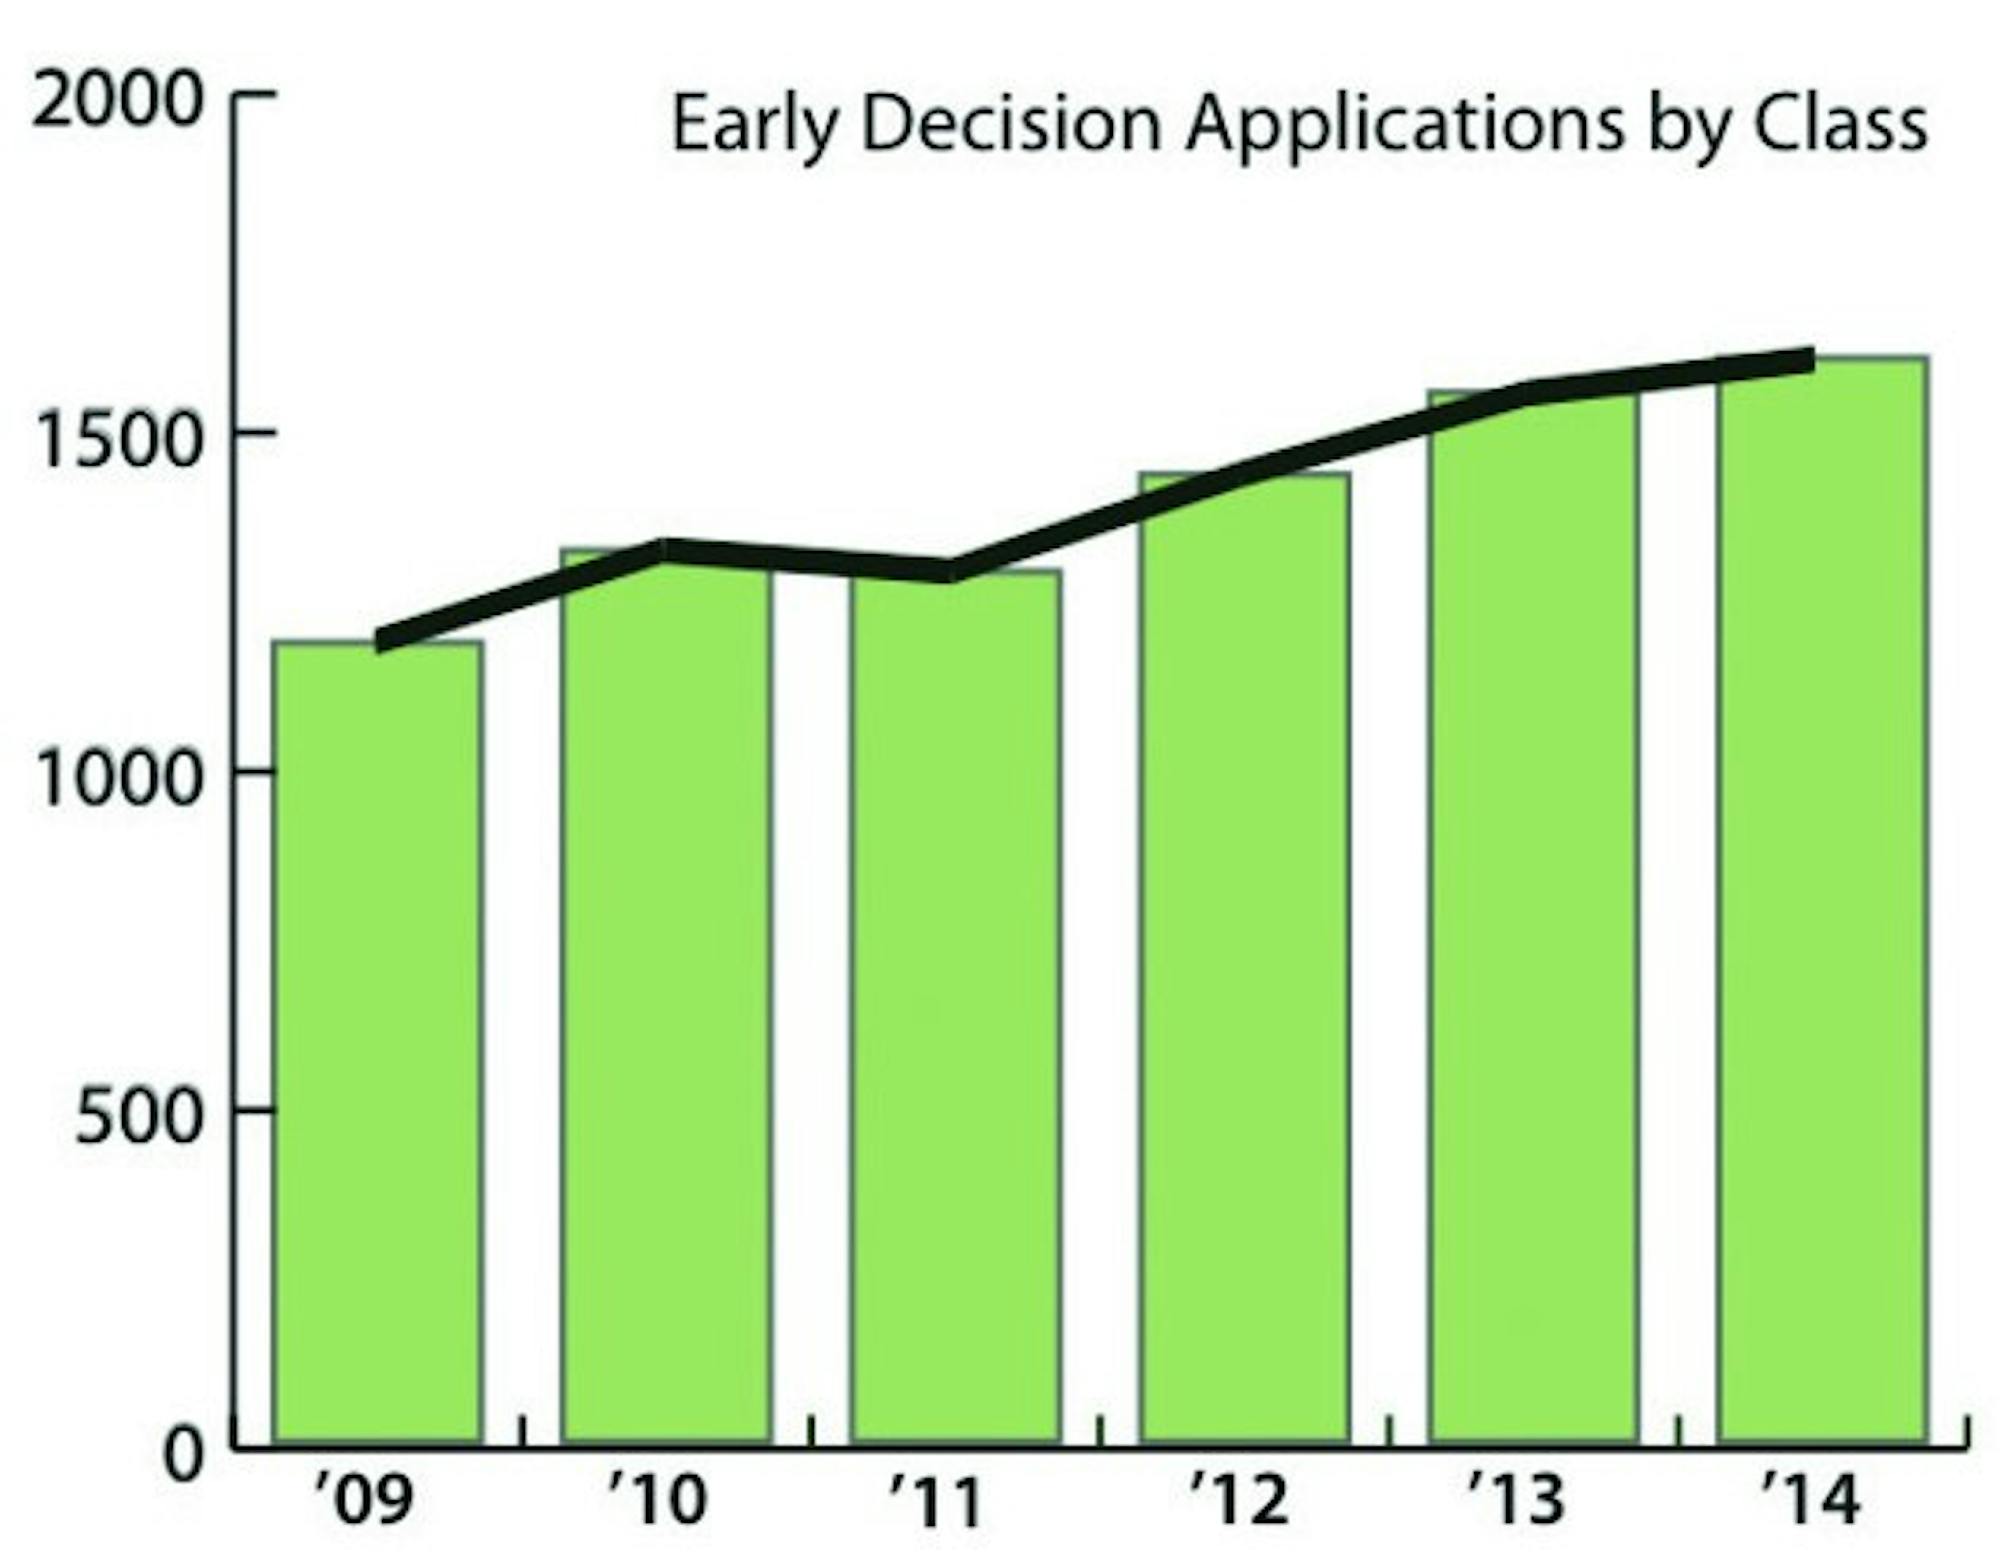 The College received a record number of early decision applications this year, including a record number of applications from international students.